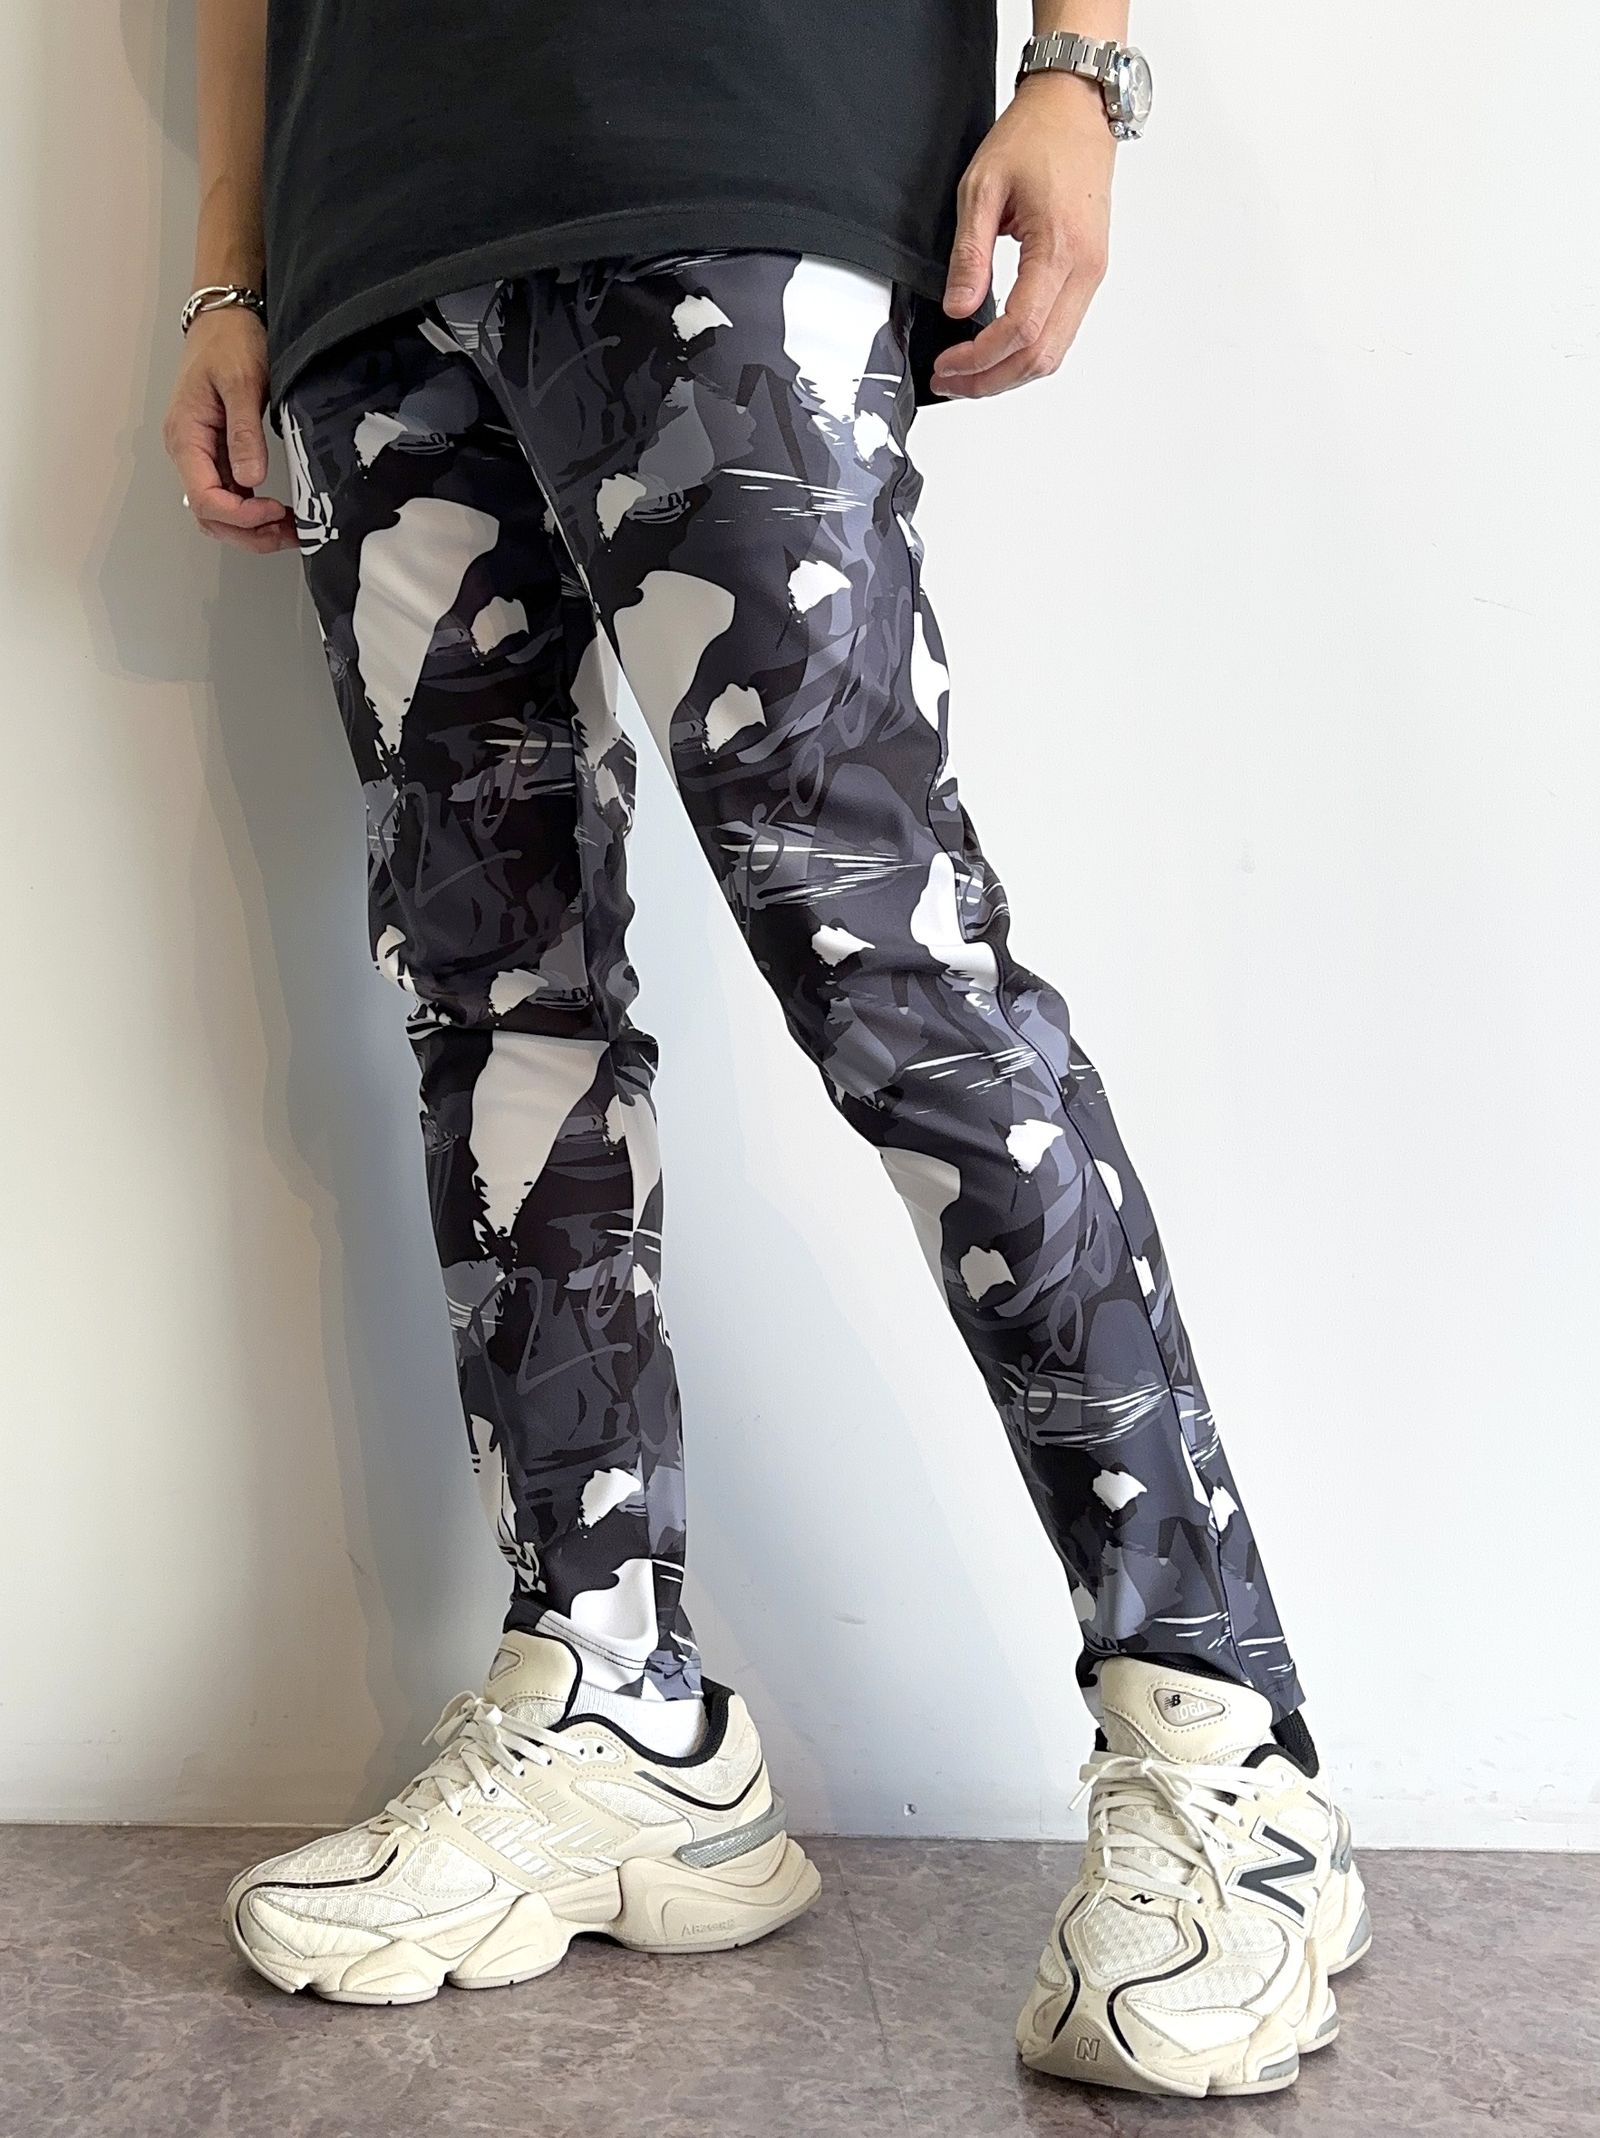 RESOUND CLOTHING - CHRIS EASY TUCK PANTS / RC29-ST-016T / カモ柄